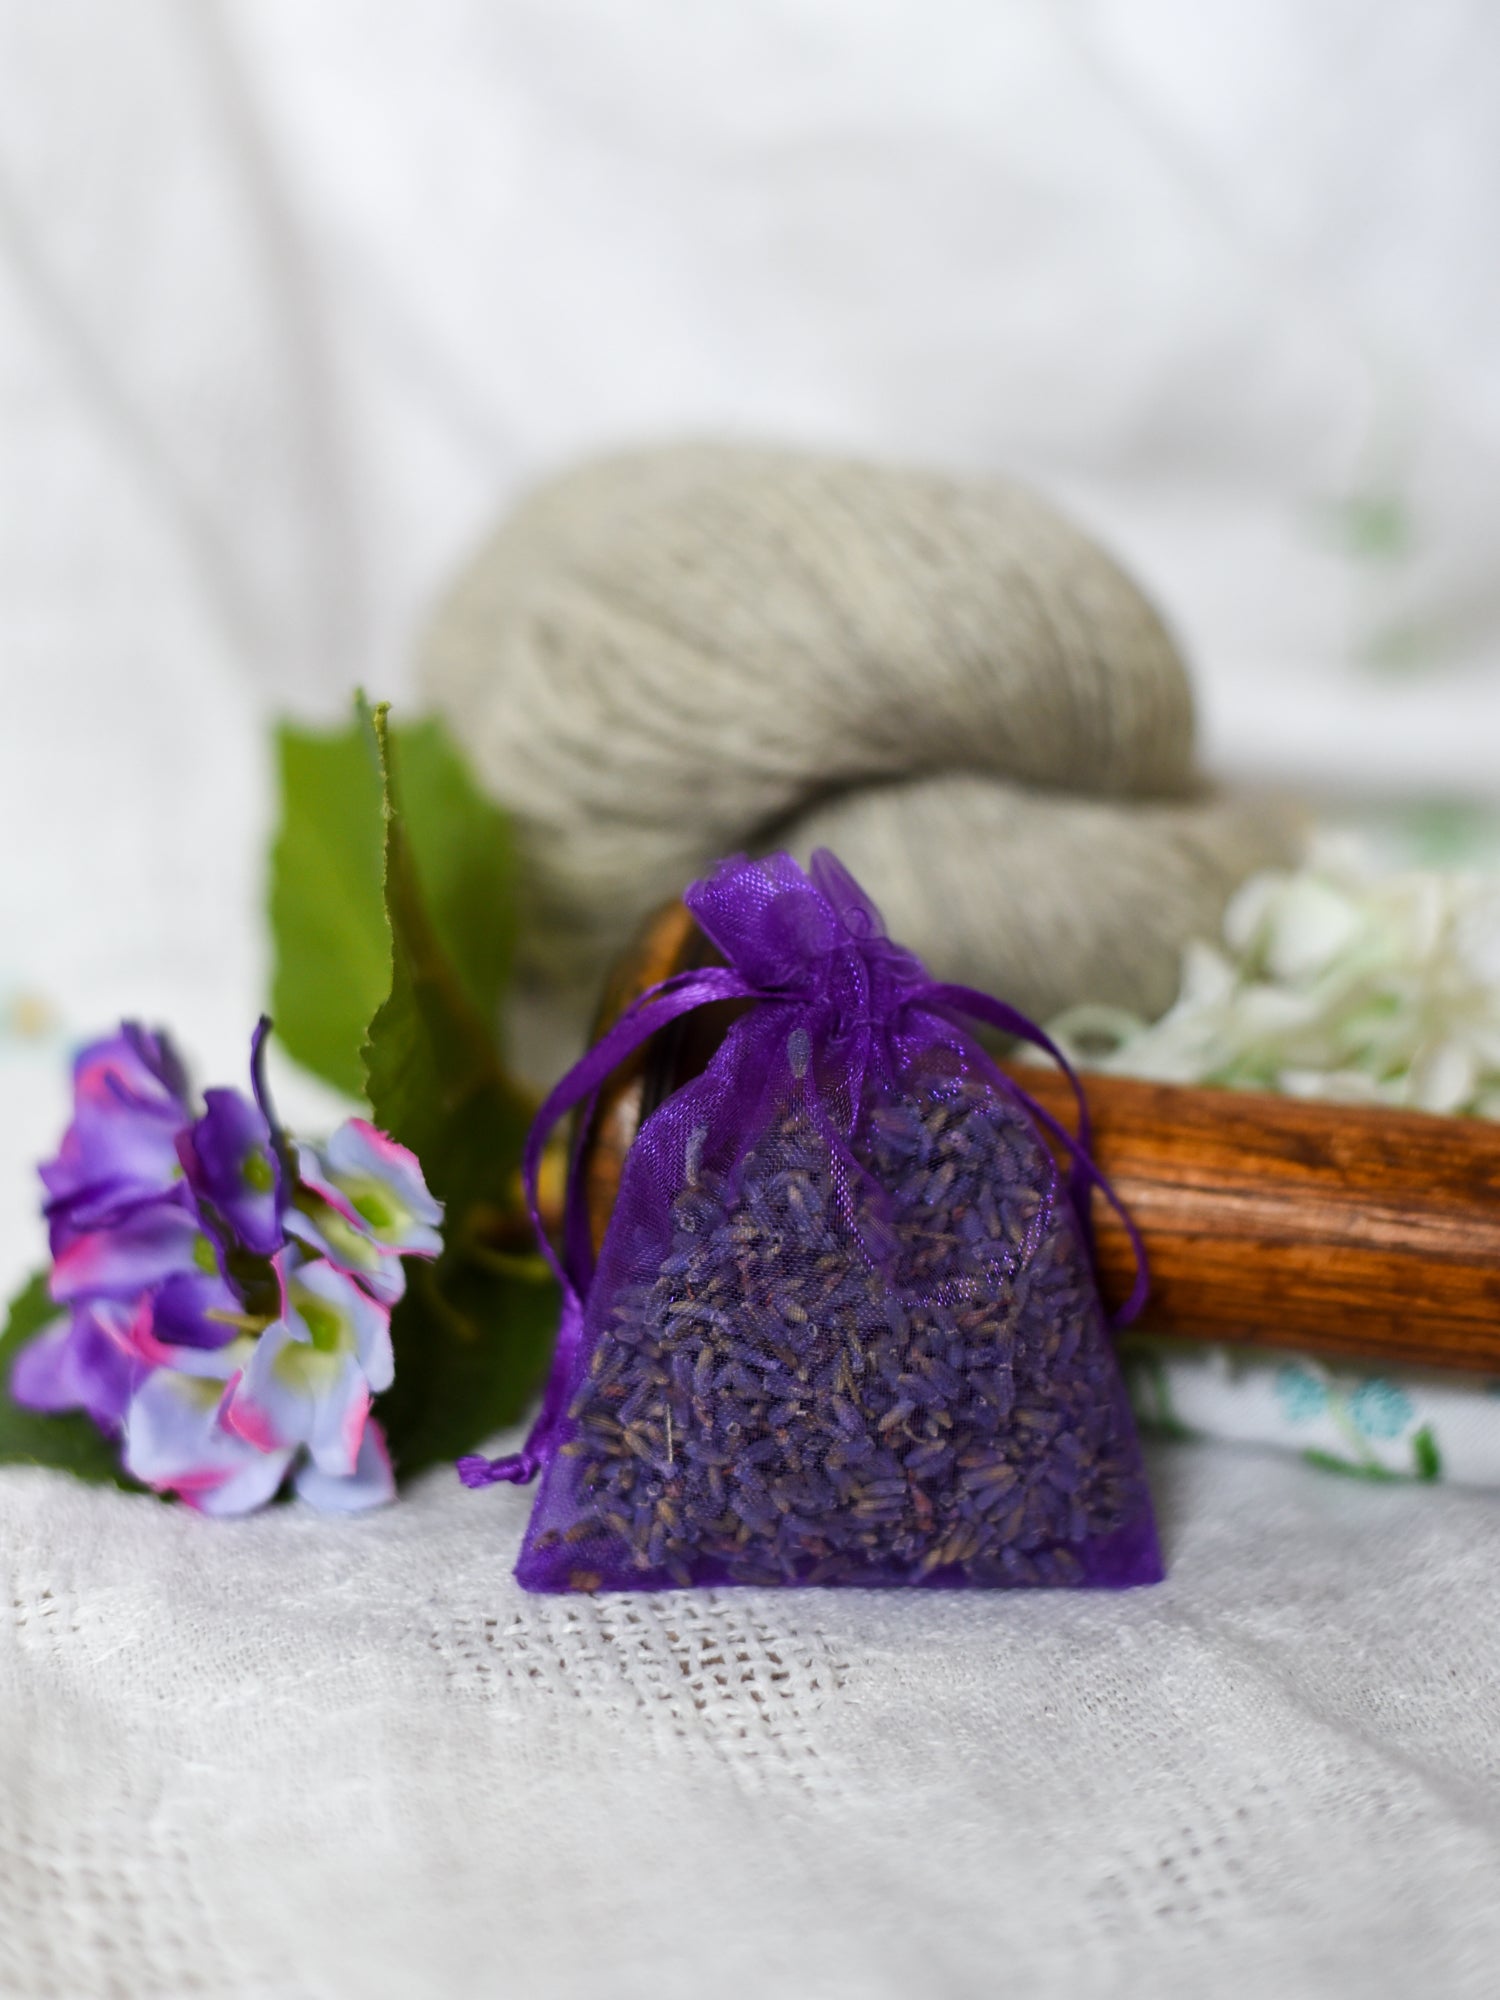 Lavender Sachets Moth Repellent for Yarn and Clothing Organic Dried Lavender  Flowers 